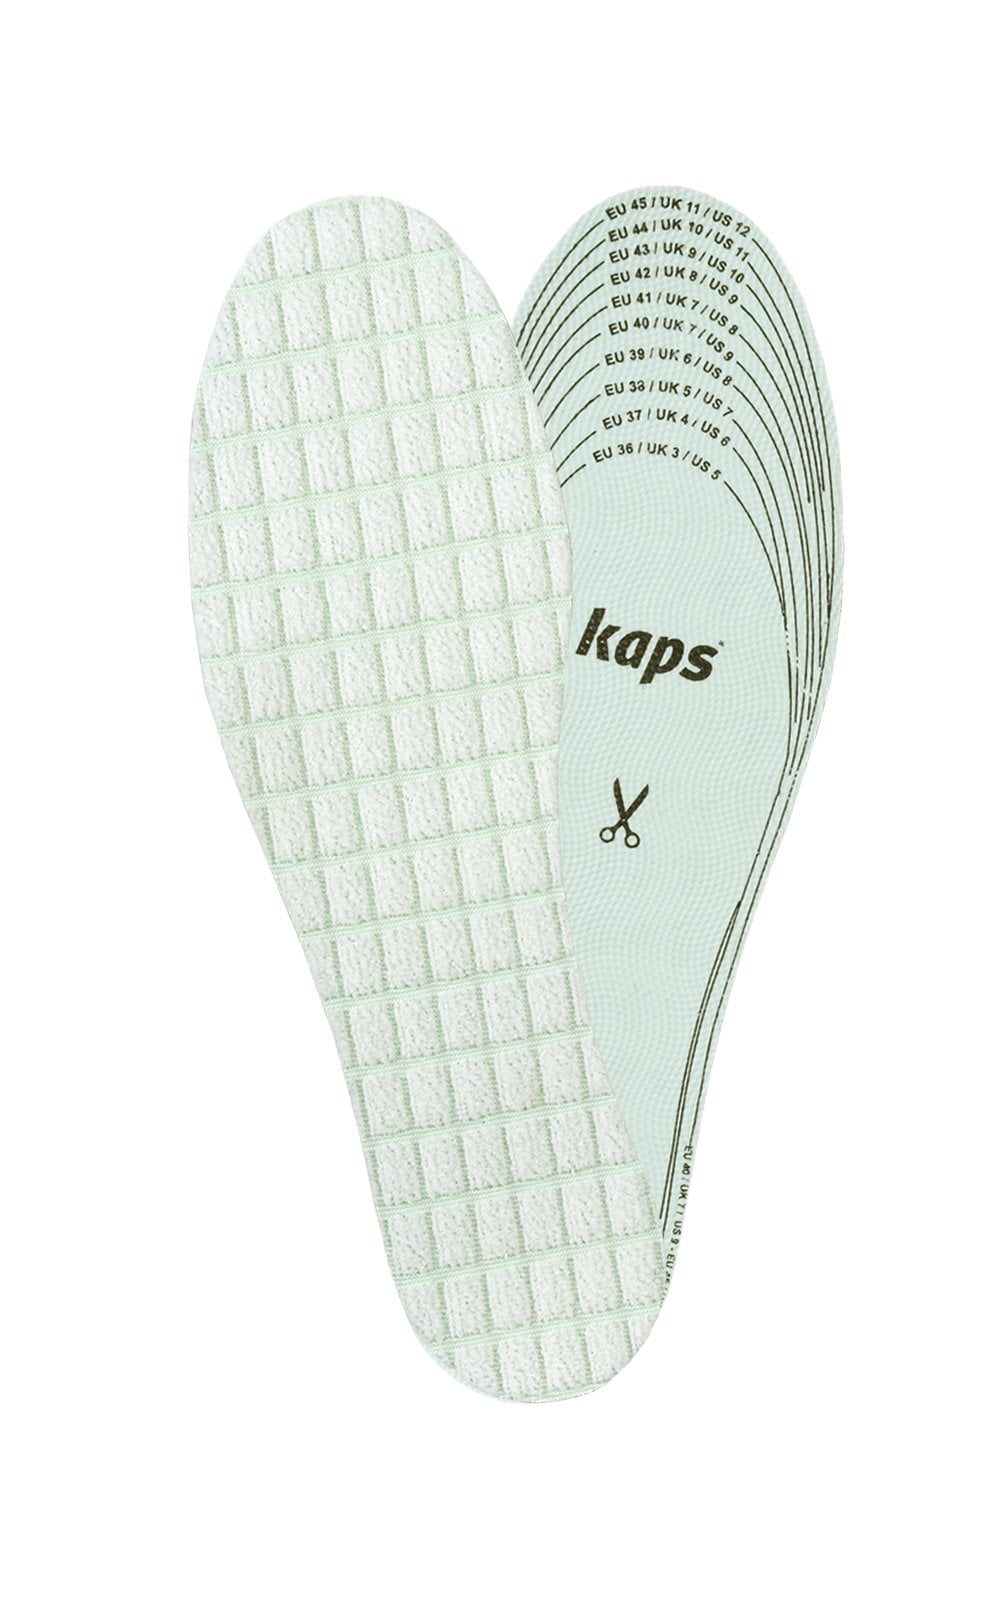 Alum and Charcoal Kaps Antifungal Insoles with Bamboo Shoe Insoles Men Women 